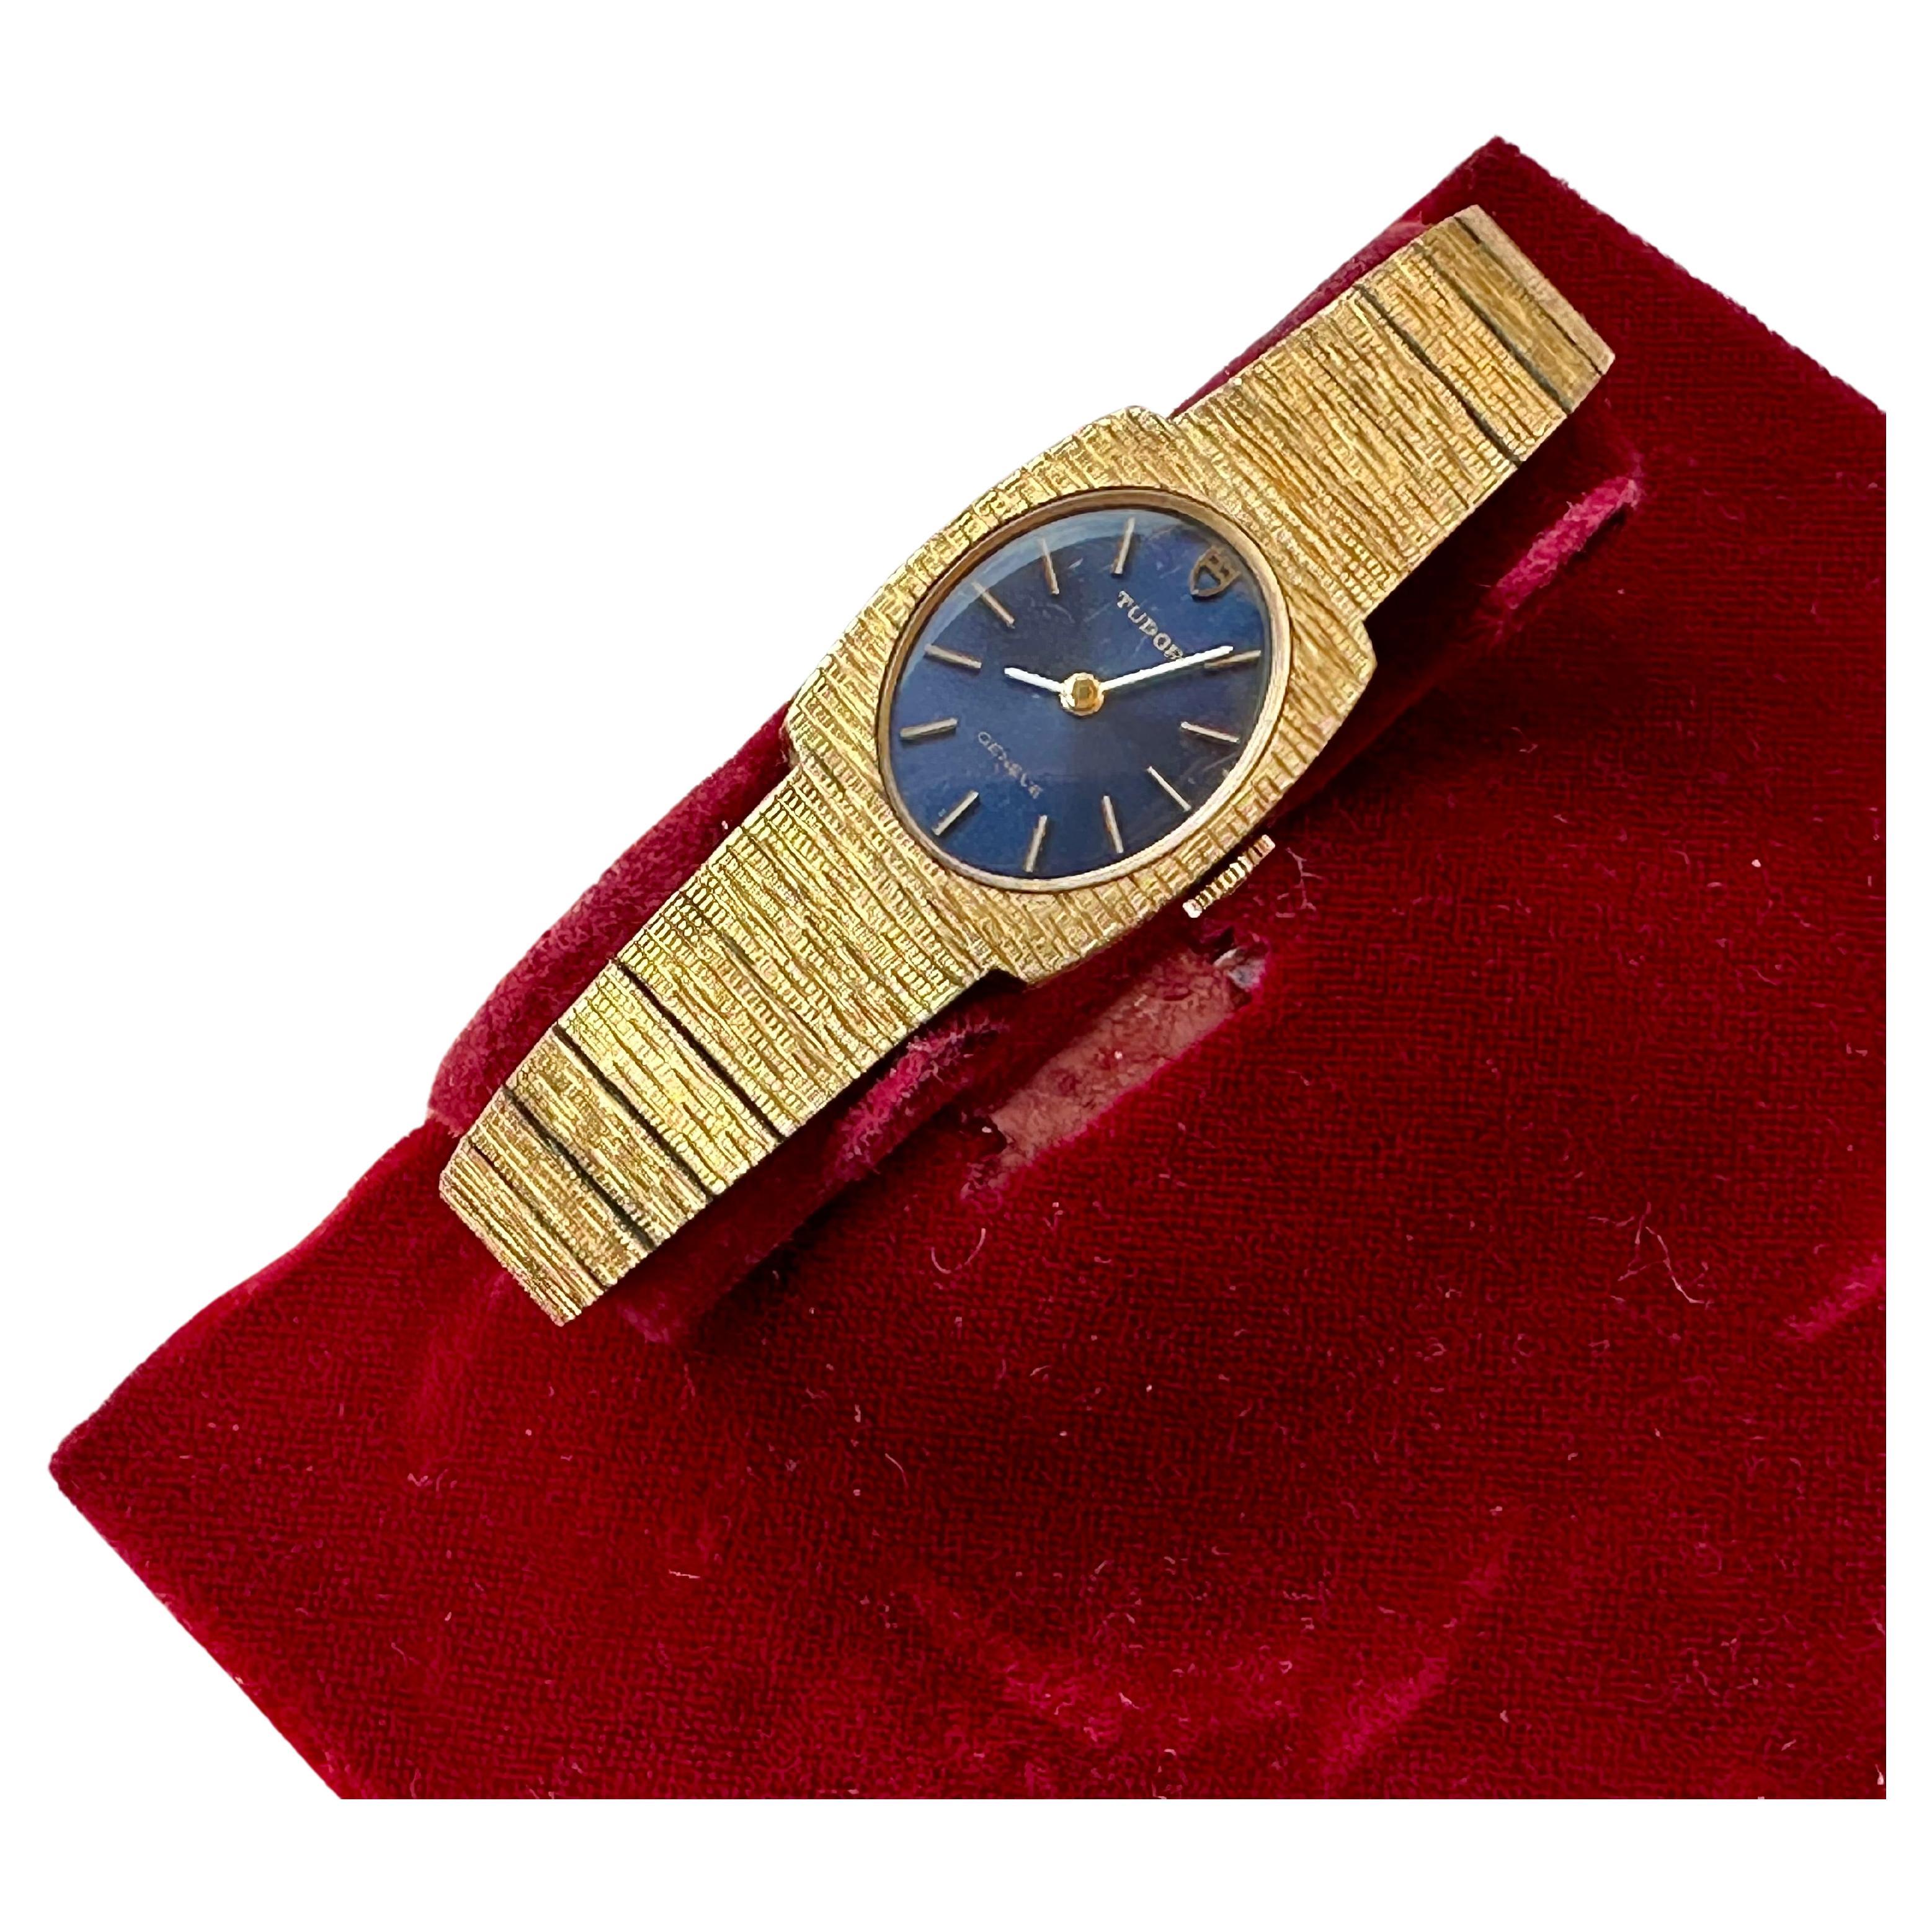 Tudor Geneve Luxury Ref 9561 Gold Plated Watch Full Set For Sale